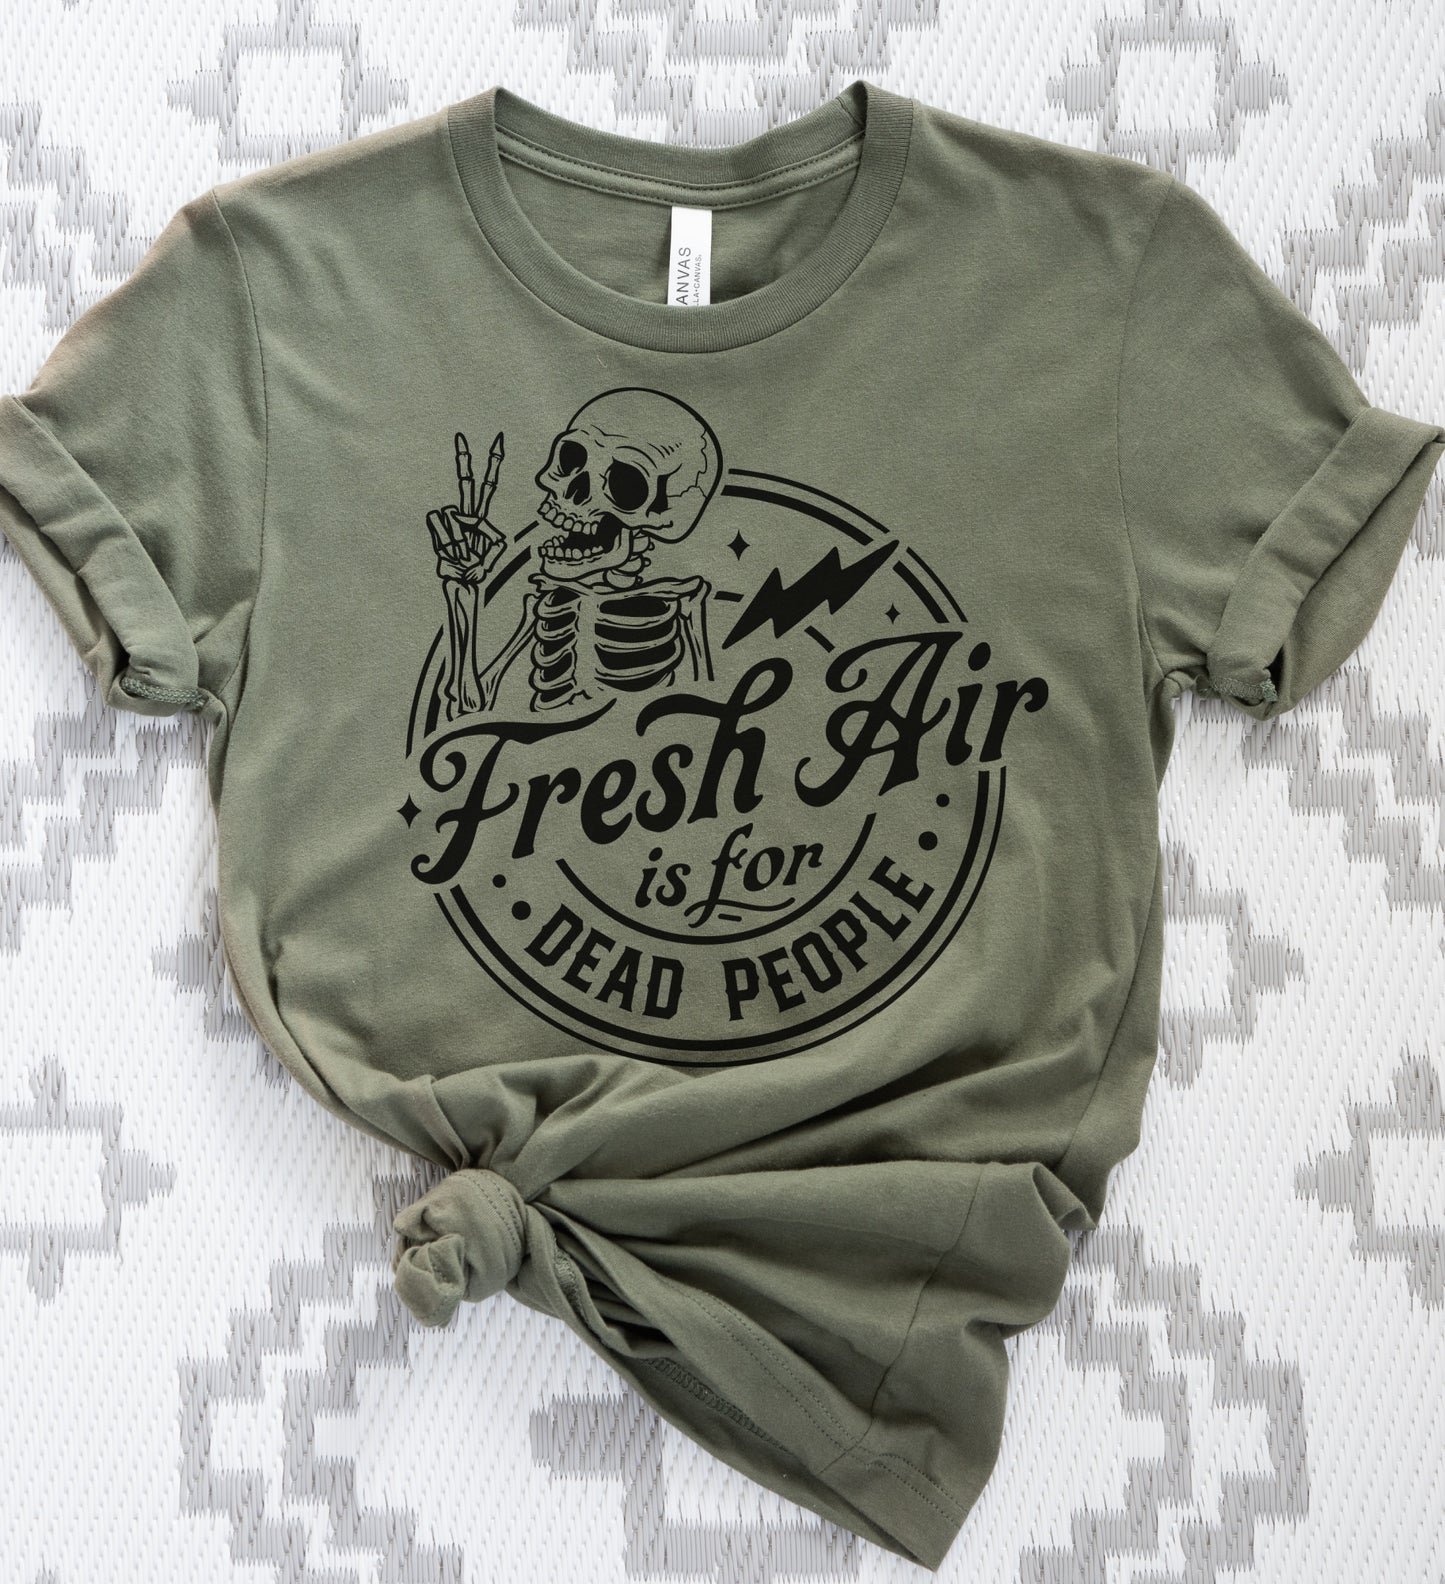 Fresh Air is for Dead People T-Shirt Funny Sarcastic Tshirt Funny Sarcasm Tee Fun Hilarious Shirt Adult Small thru XXLarge